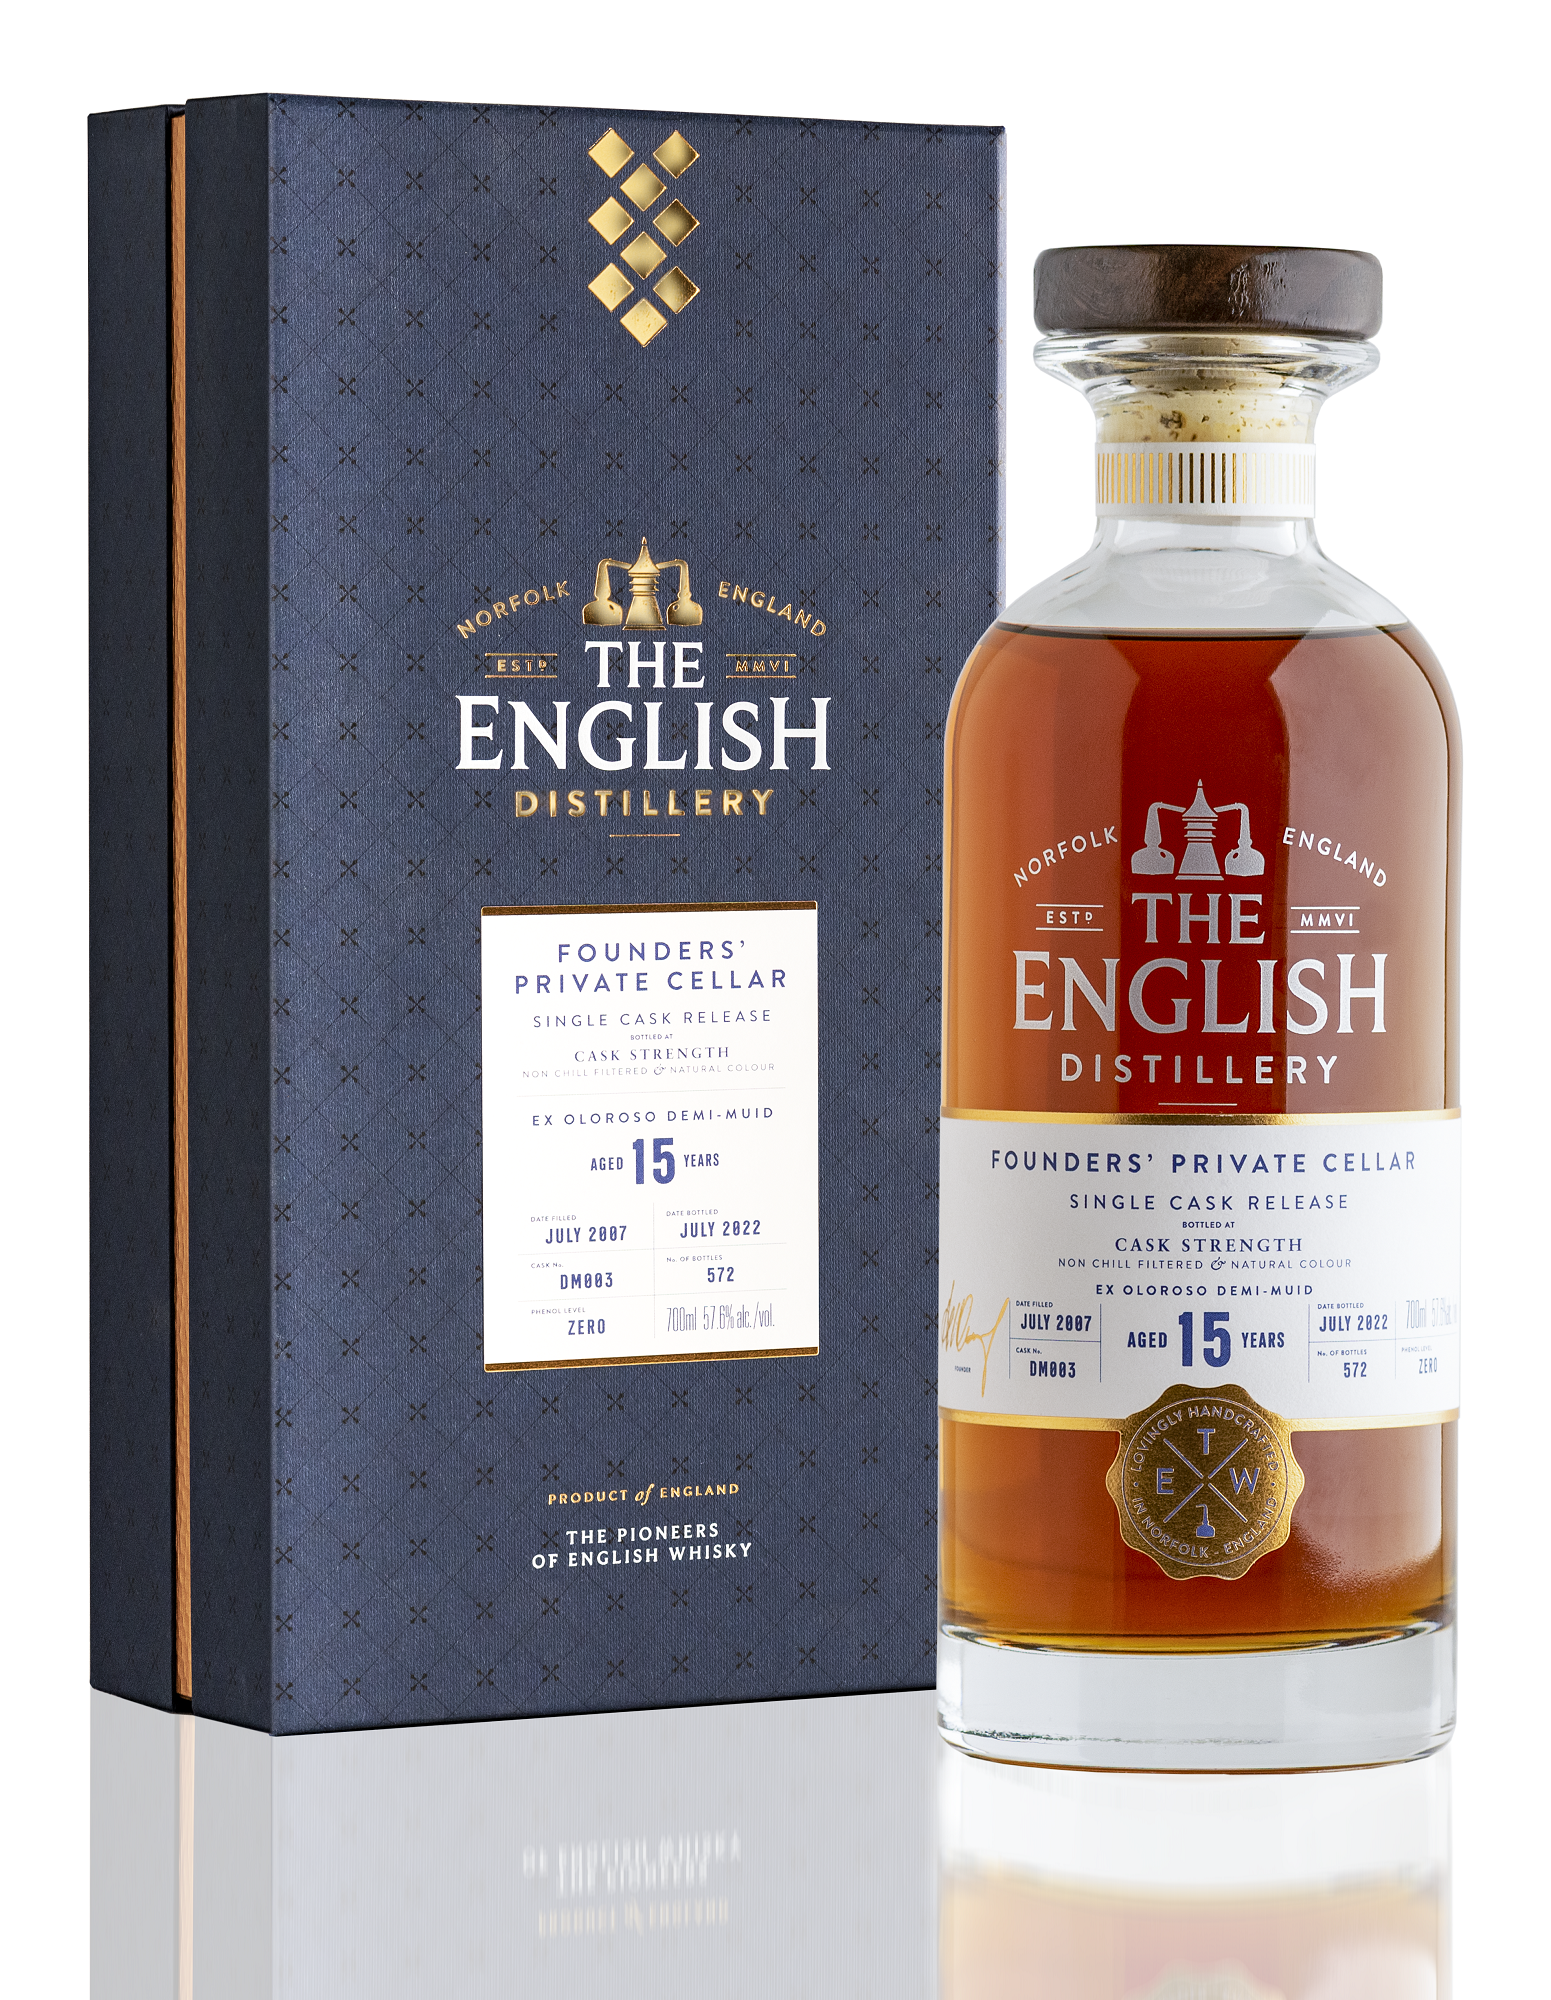 Bottle of The English 15-Year-Old Anniversary, Founders' Private Cellar Ex-Oloroso Demi-Muid, Single Malt Whisky, 57.6% - The Spirits Room